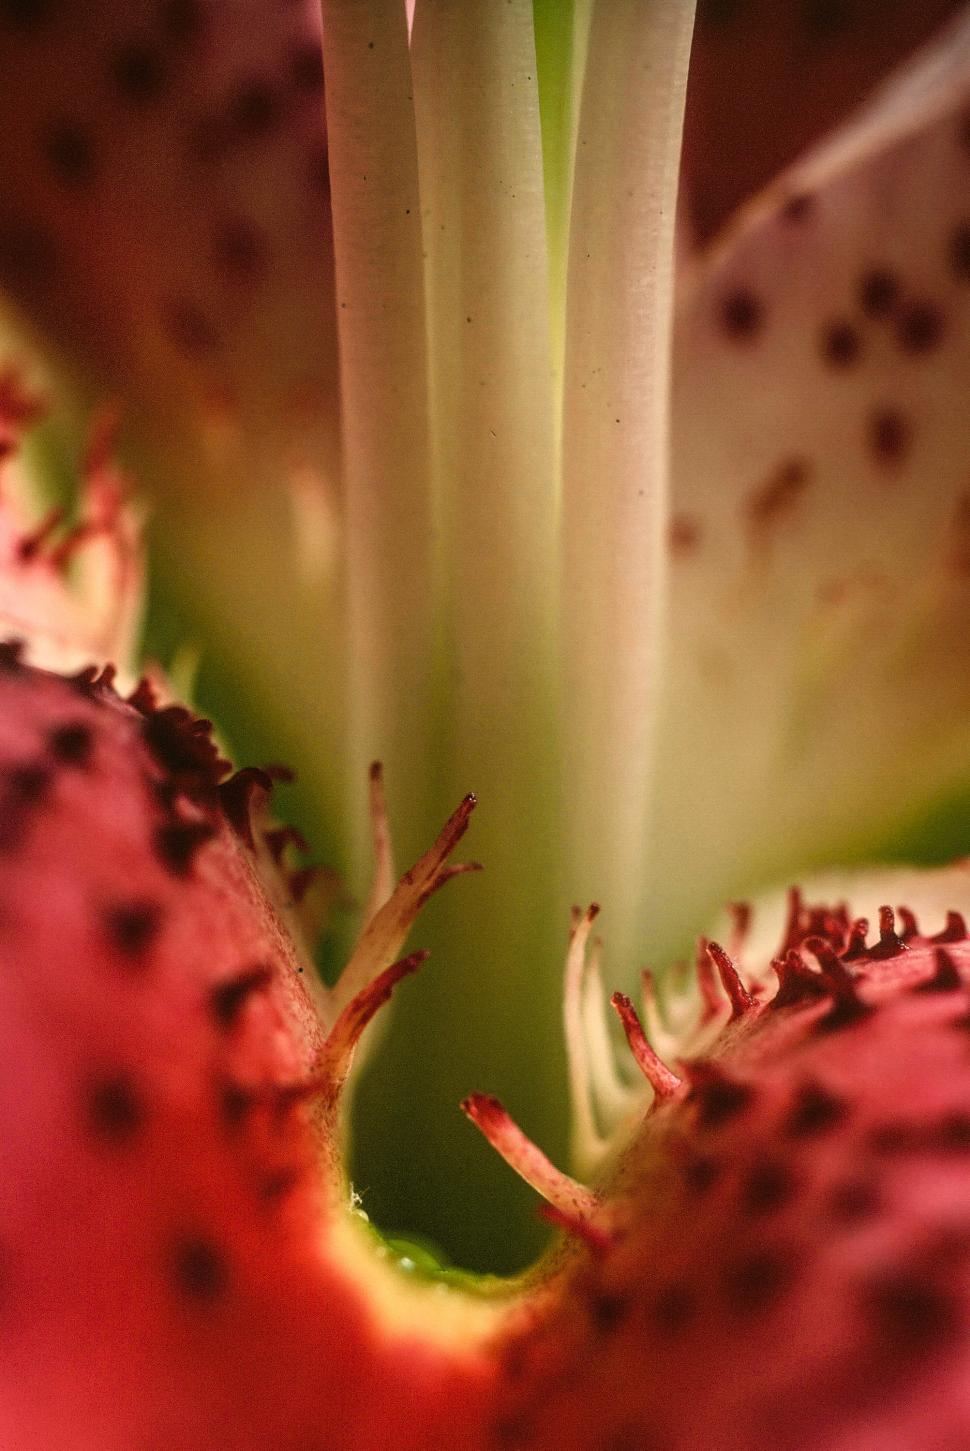 Free Image of Day-lily Stamen 